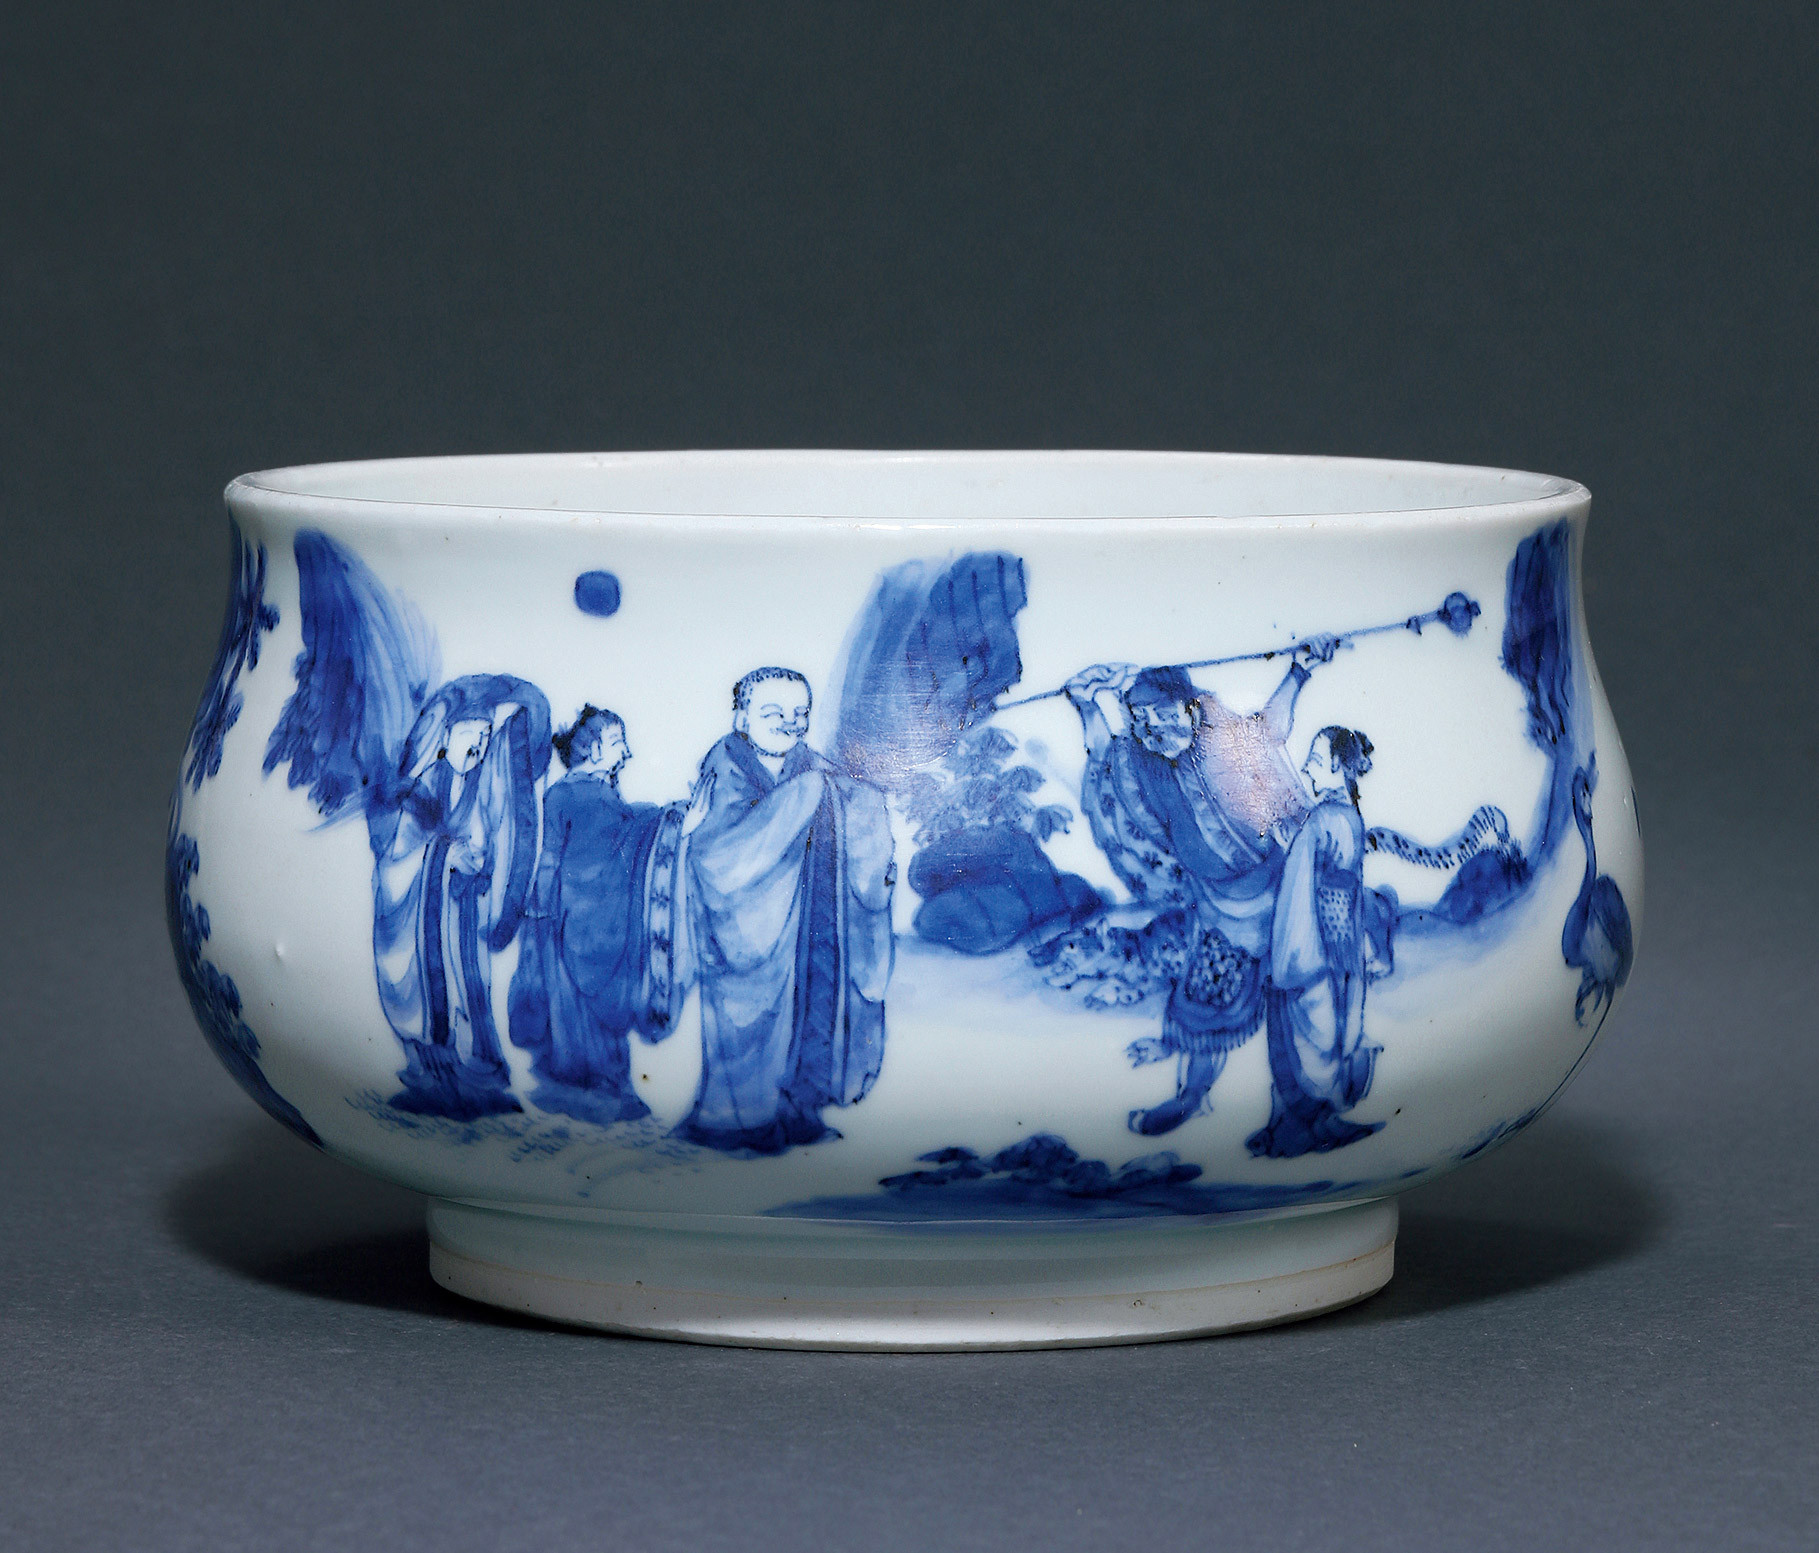 A BLUE AND WHITE INCENSE BURNER